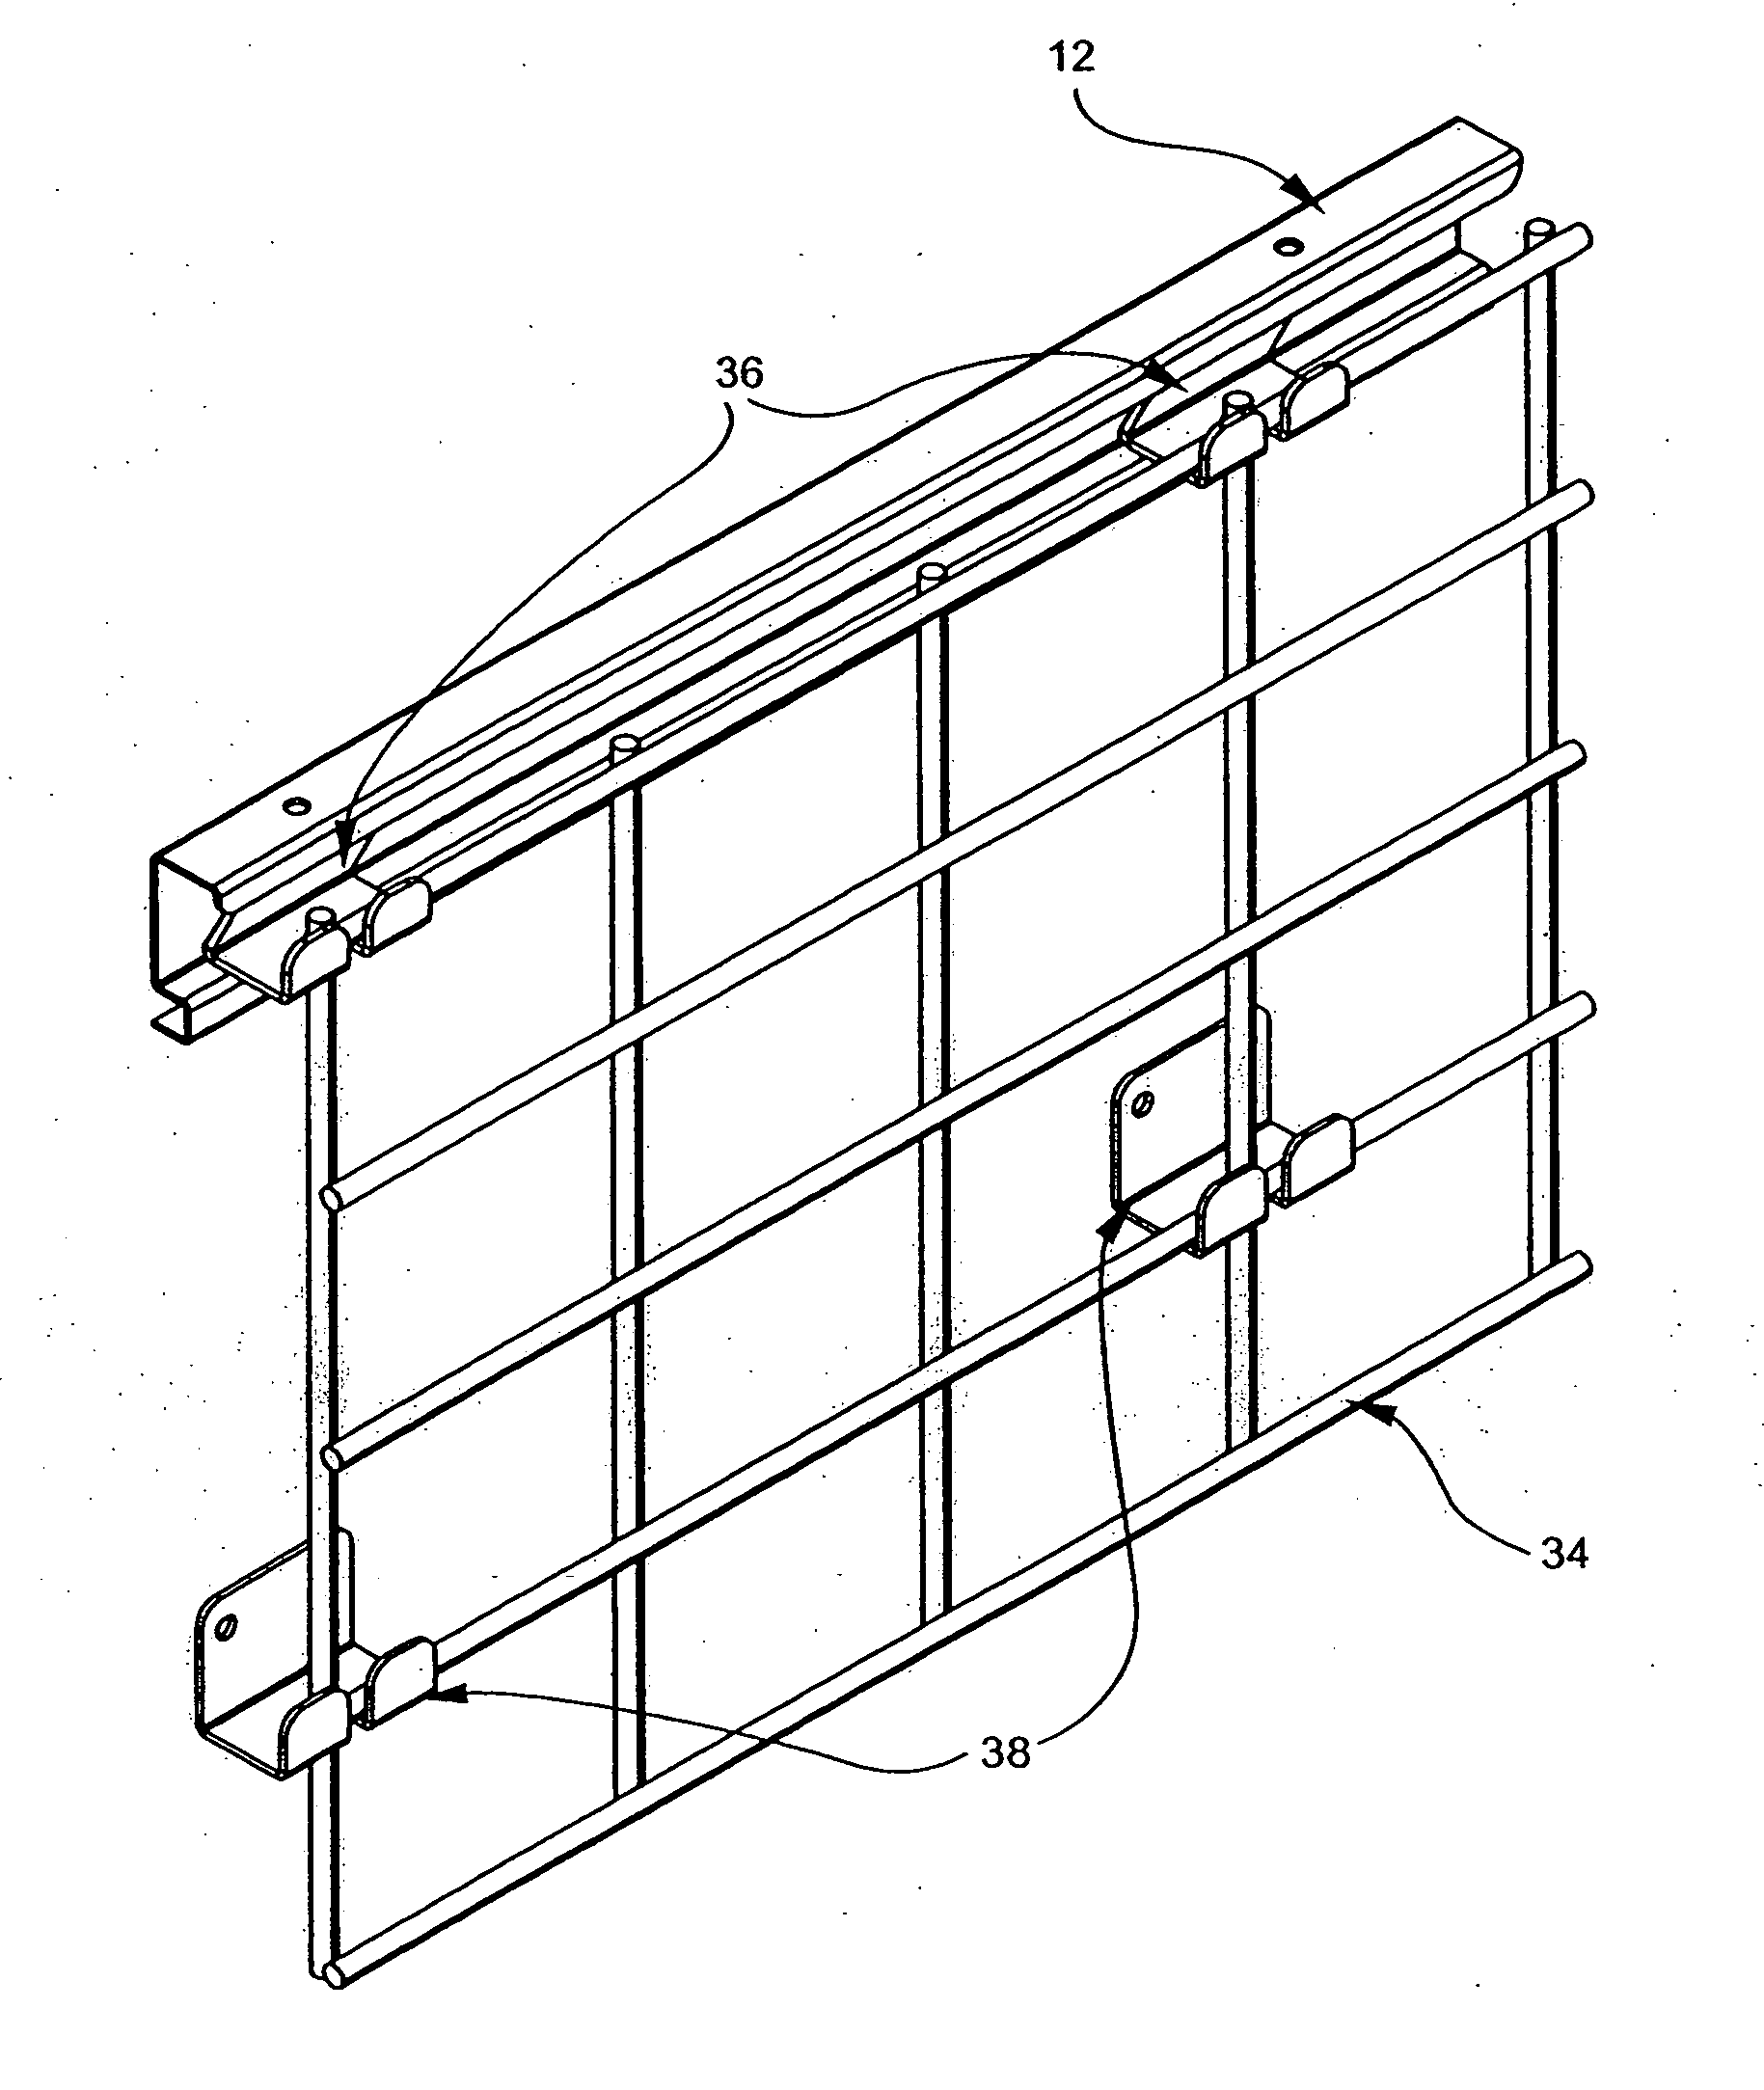 Wall-mounted shelving system